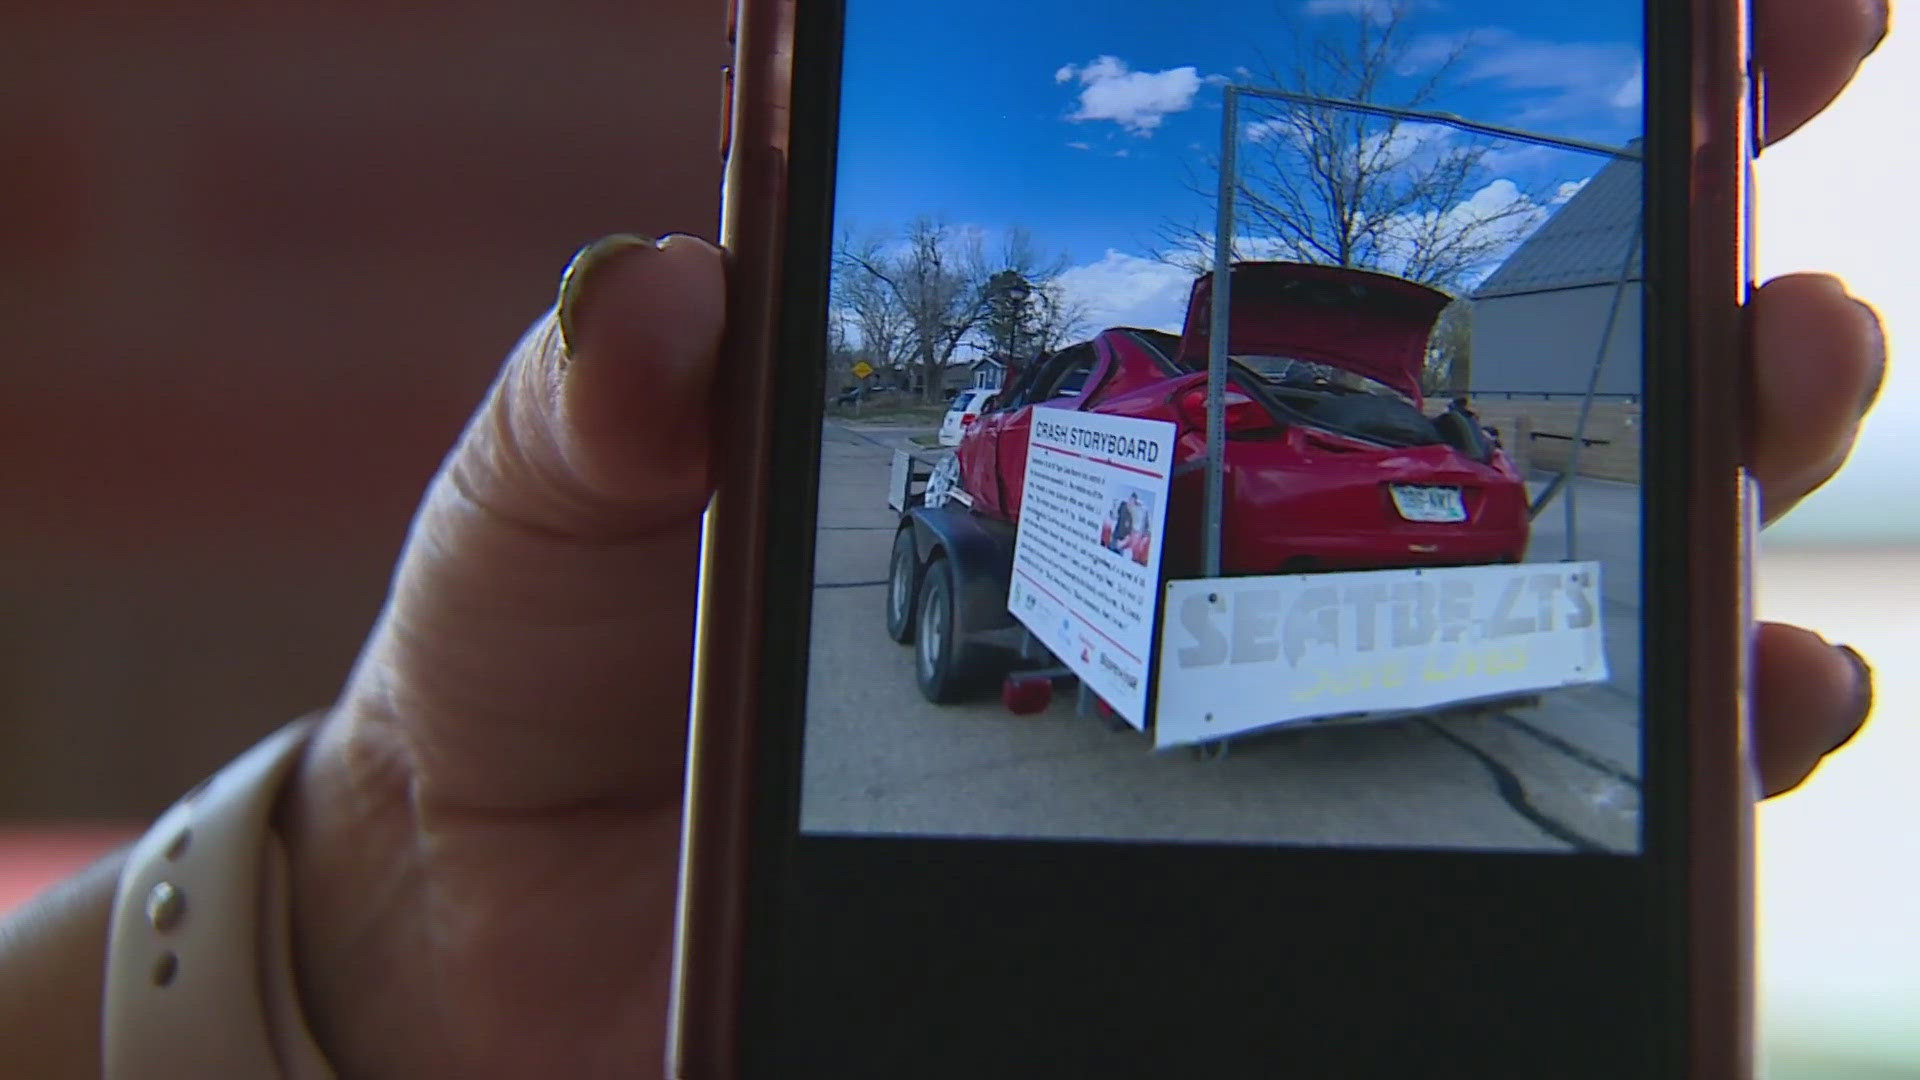 The car that belonged to 22-year-old Zach Mauer has been displayed at schools to remind students the dangers of unsafe and distracted driving.